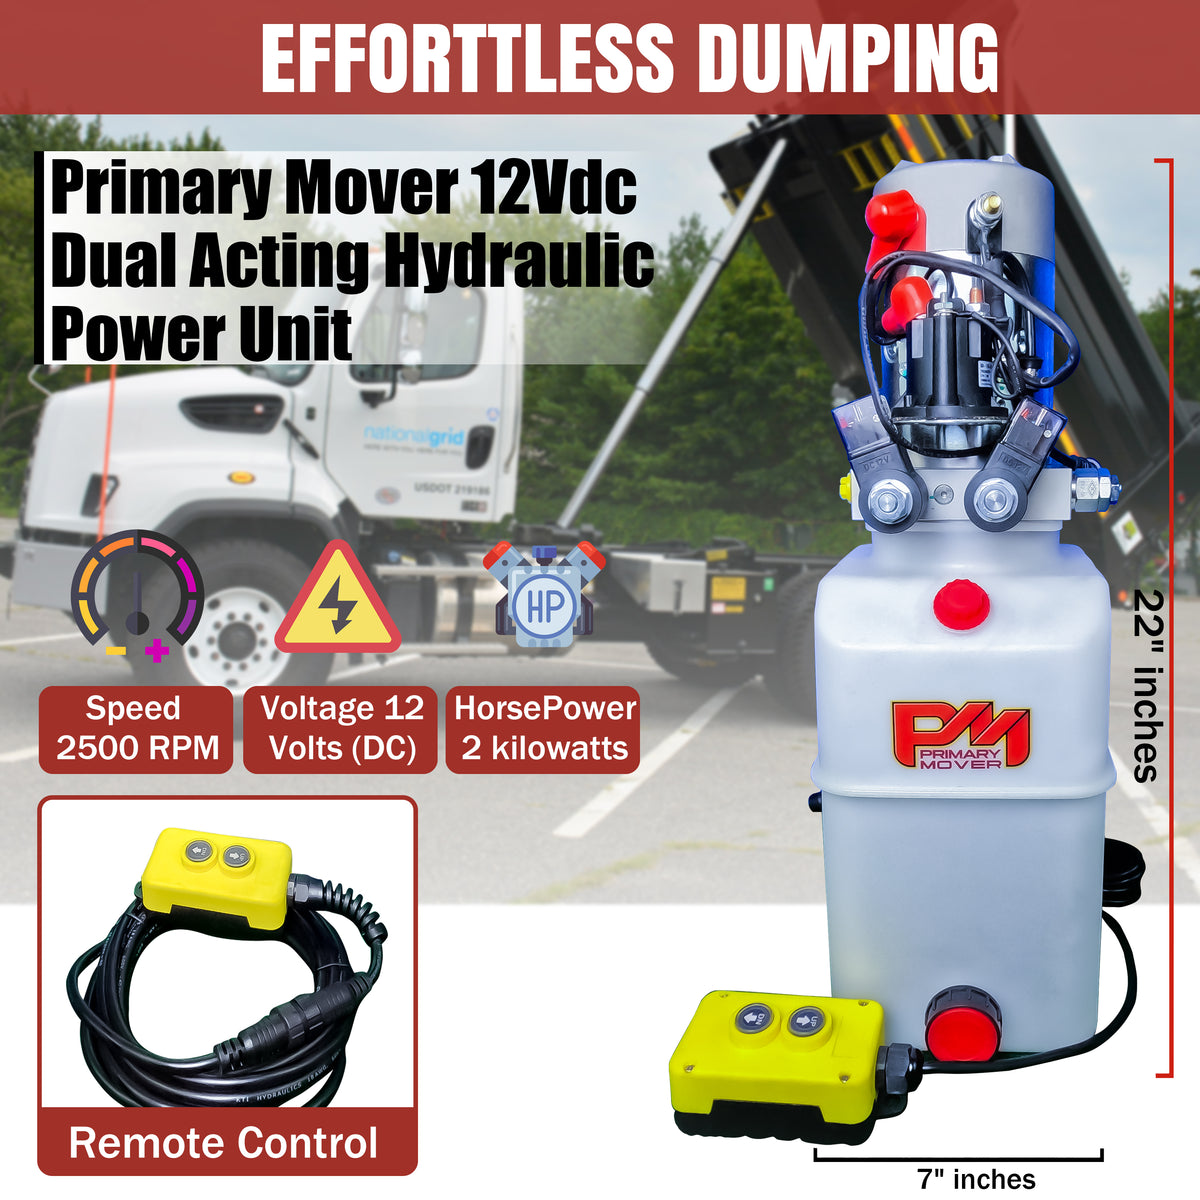 Primary Mover 12V Double-Acting Hydraulic Pump - Poly Reservoir: Precision dual-acting power unit for hydraulic dump bed systems. Crafted for efficiency and durability, offering exceptional value and performance.